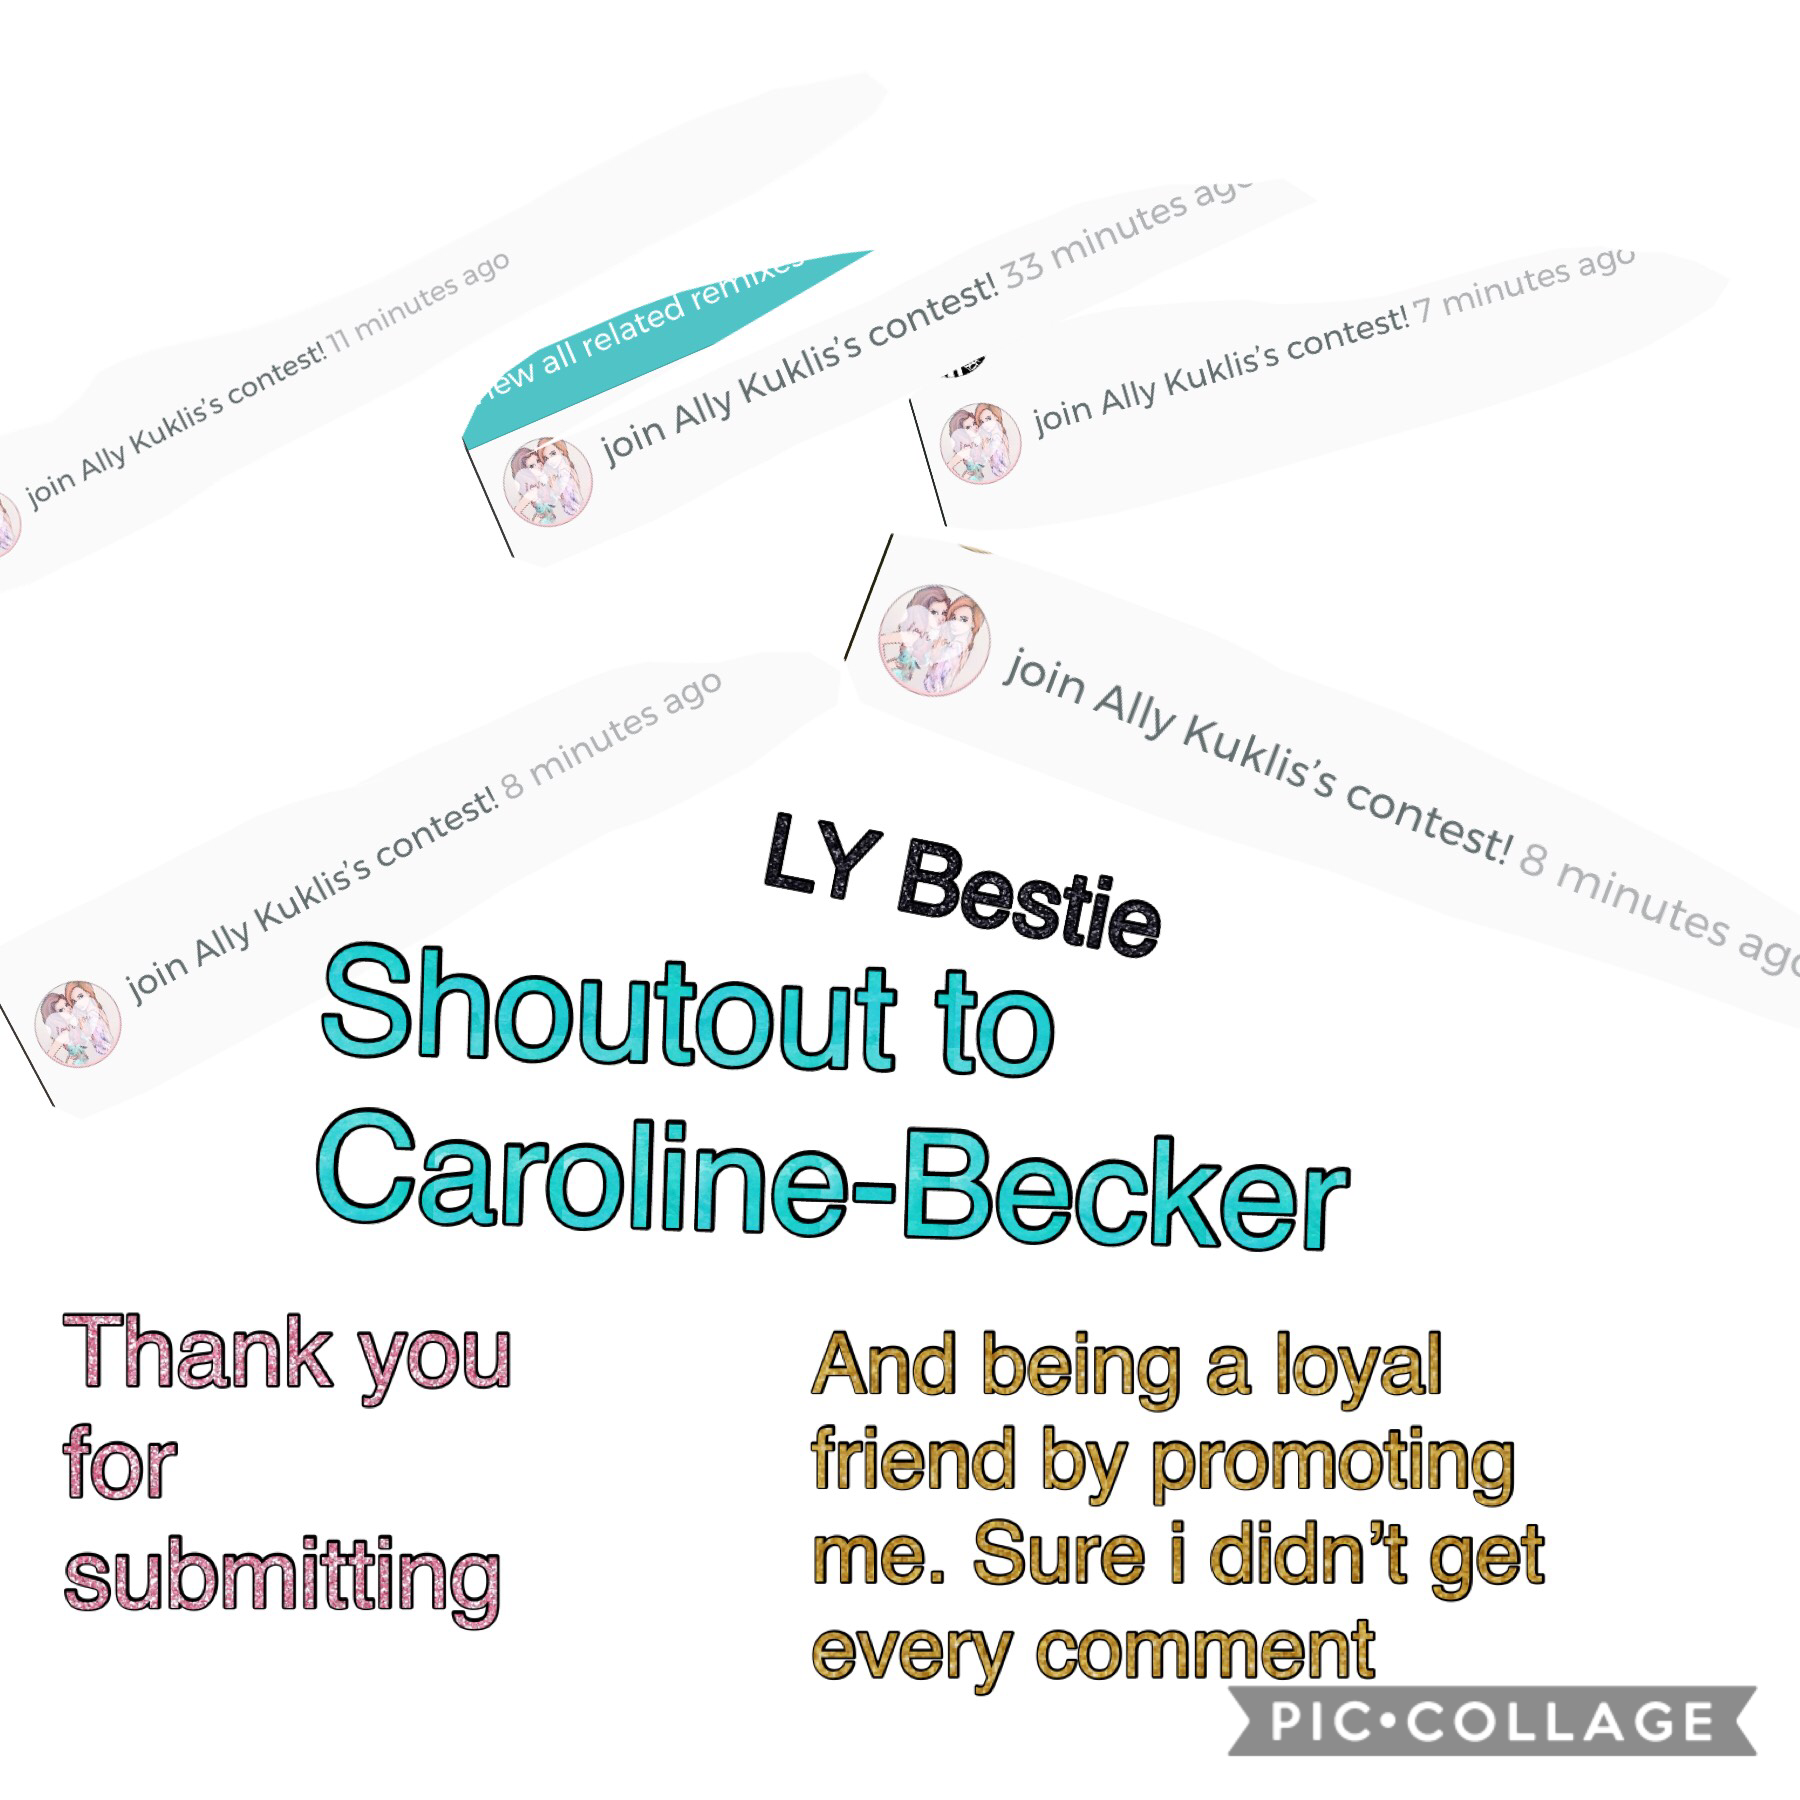 Go follow her!! @caroline-becker. Also you can get a shoutout if you submit